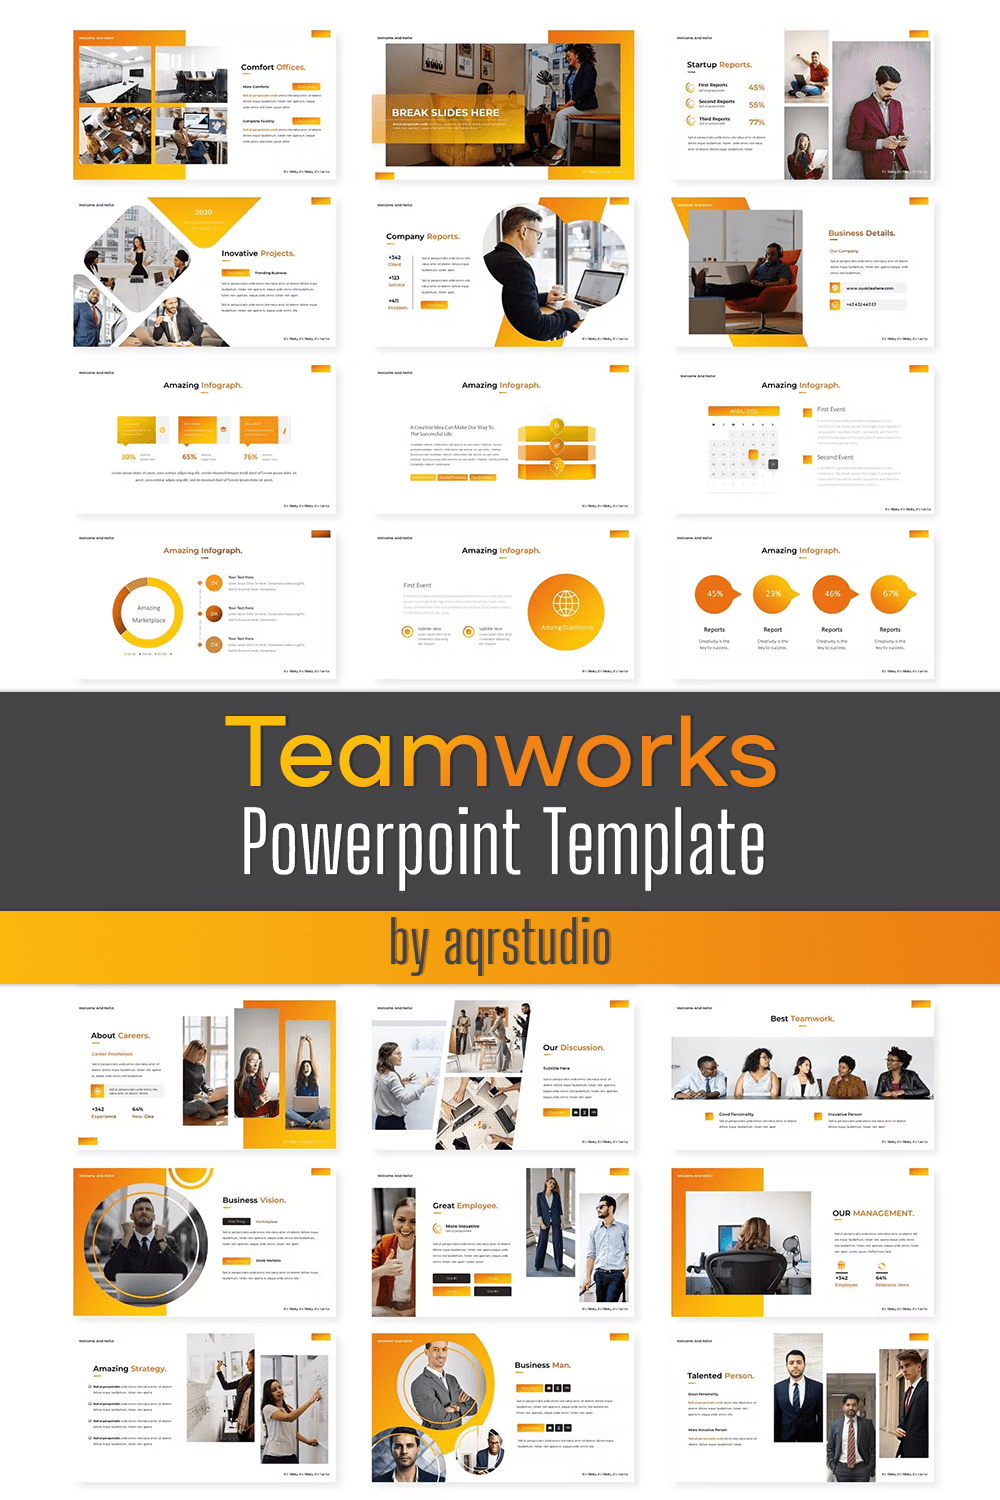 A collection of images of irresistible slide presentation template on the theme of teamwork.